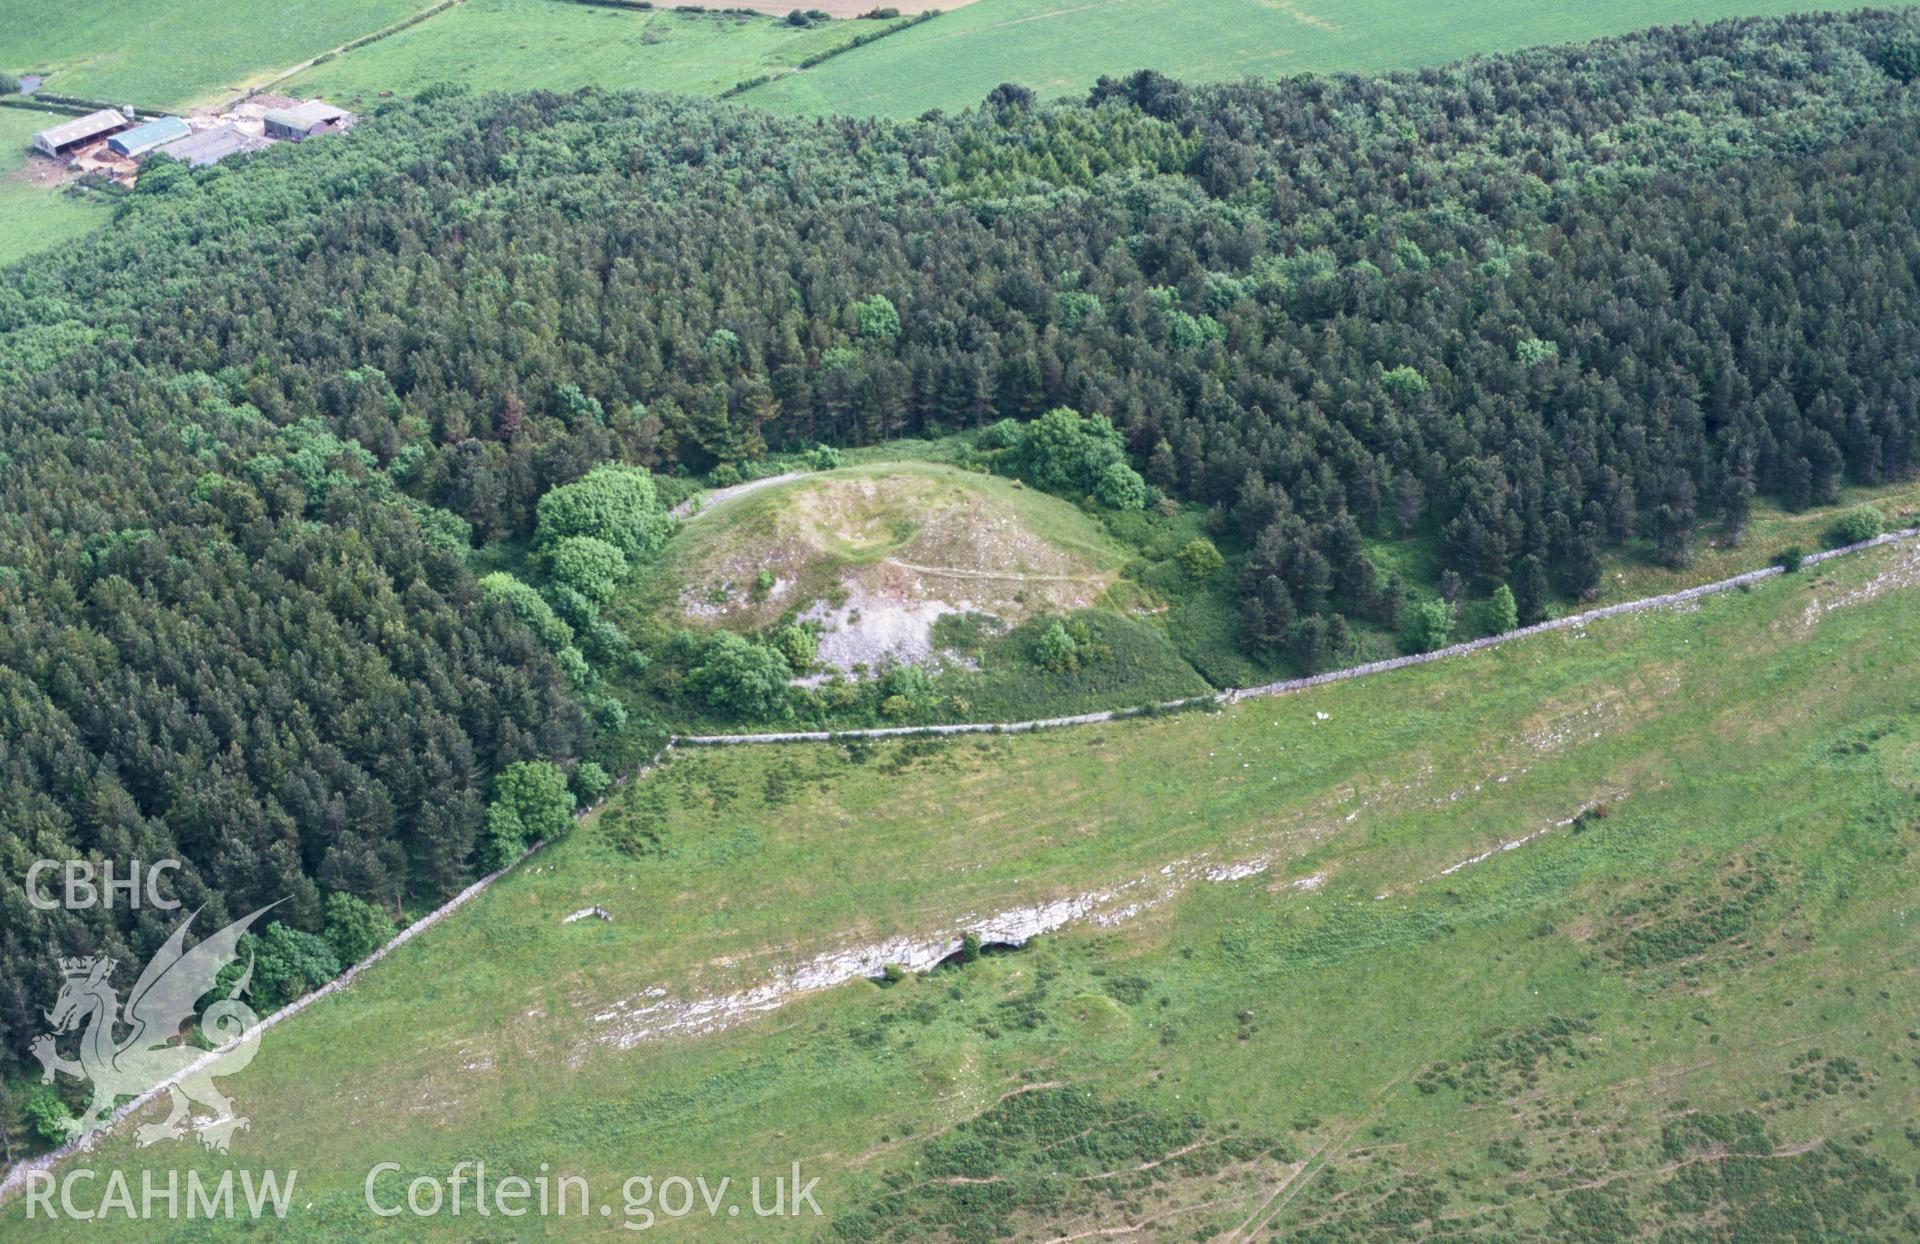 Slide of RCAHMW colour oblique aerial photograph of Gop Cairn taken by T.G. Driver, 2001.